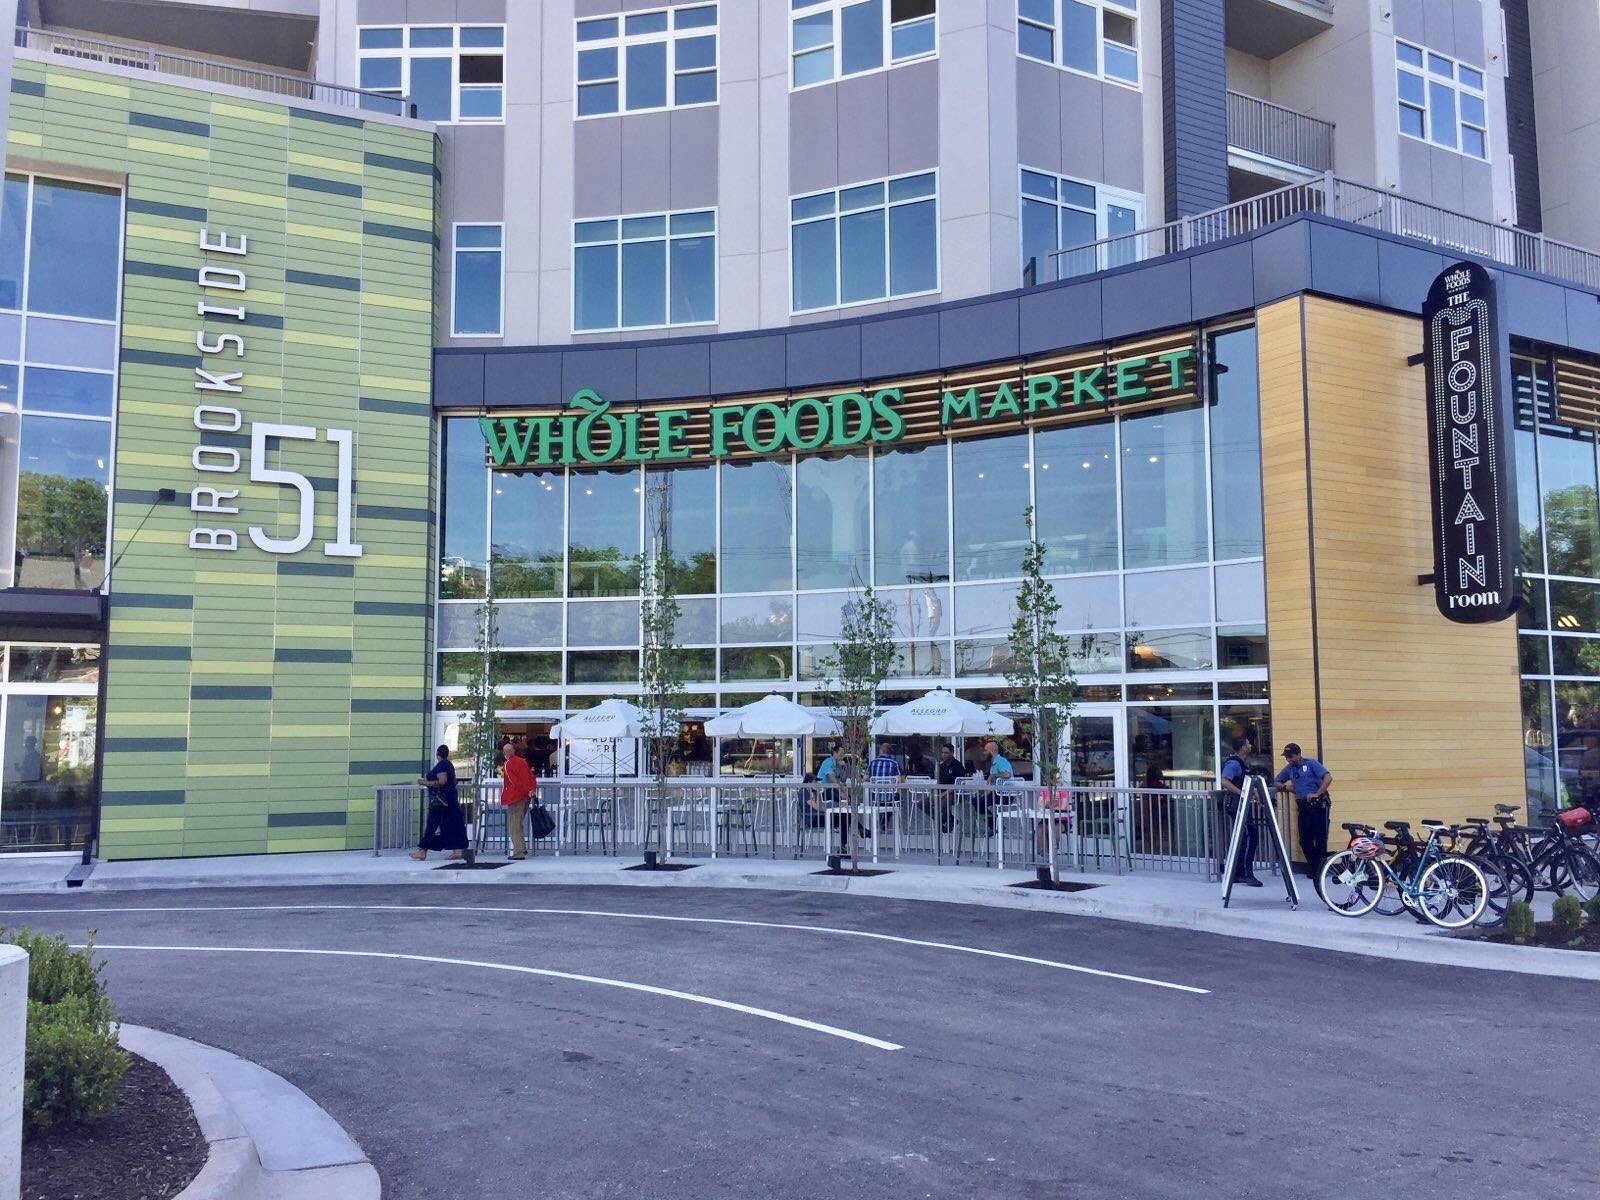 Whole Foods Market Wallpapers